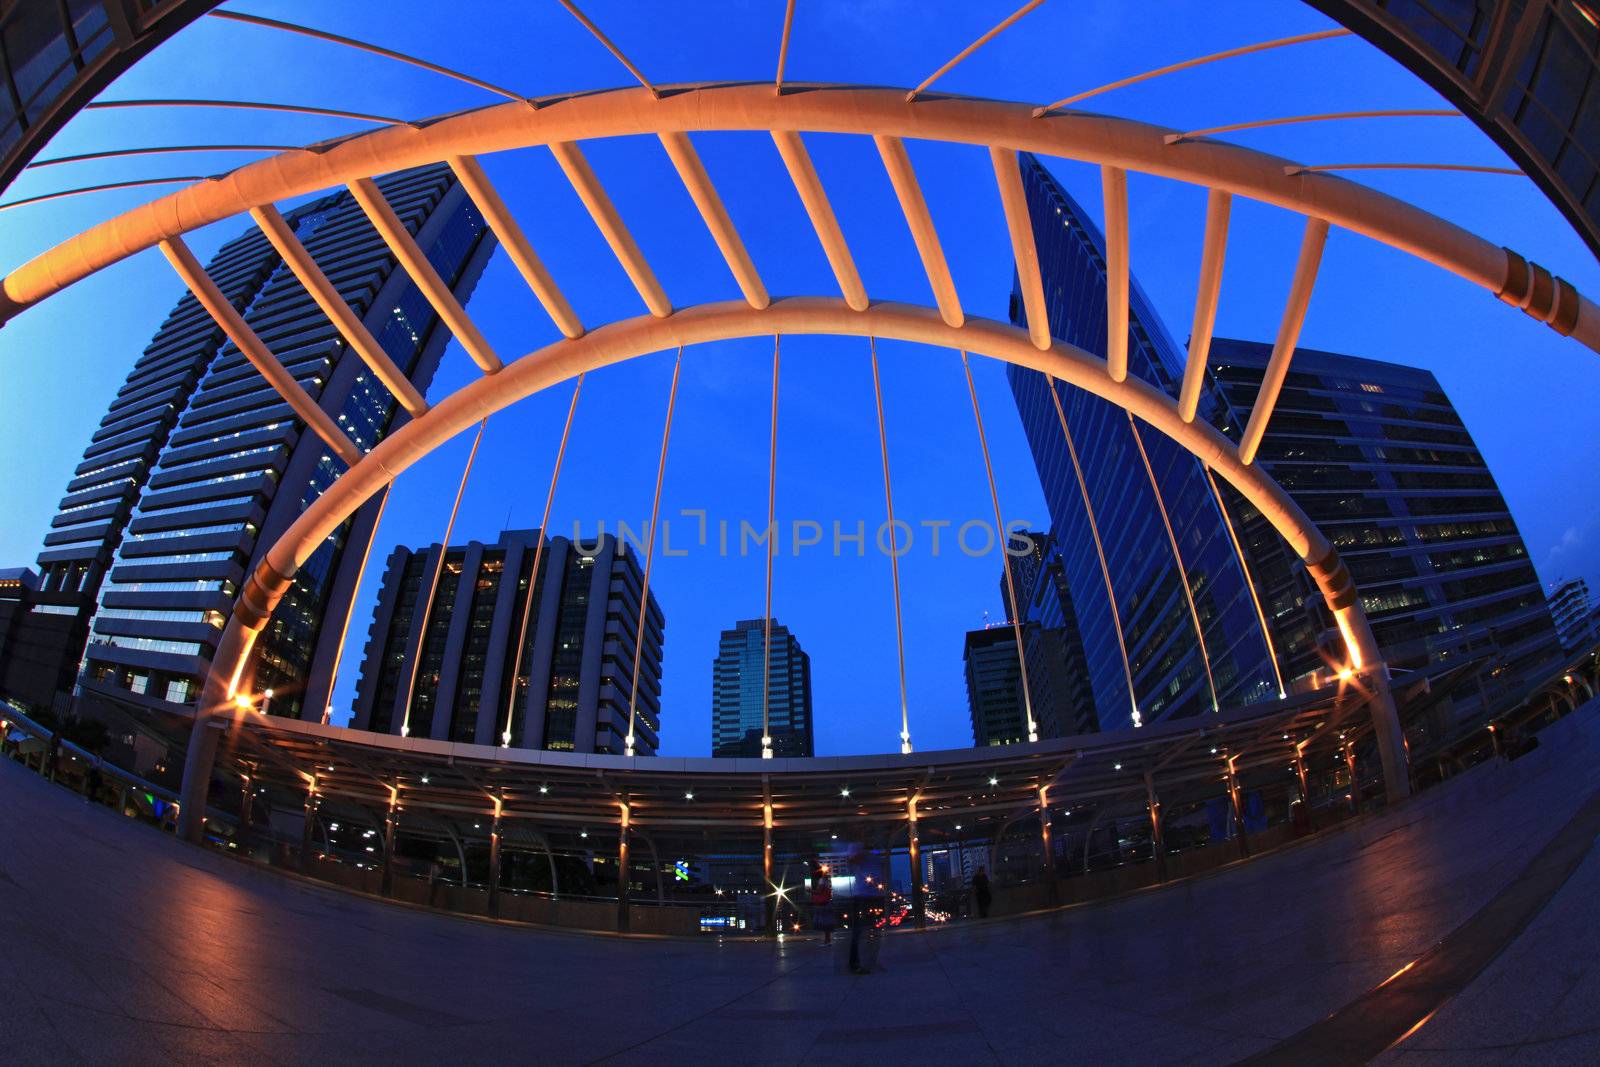 Bangkok pubic skywalk in business district downtown cityscape at night, fish eye perspective